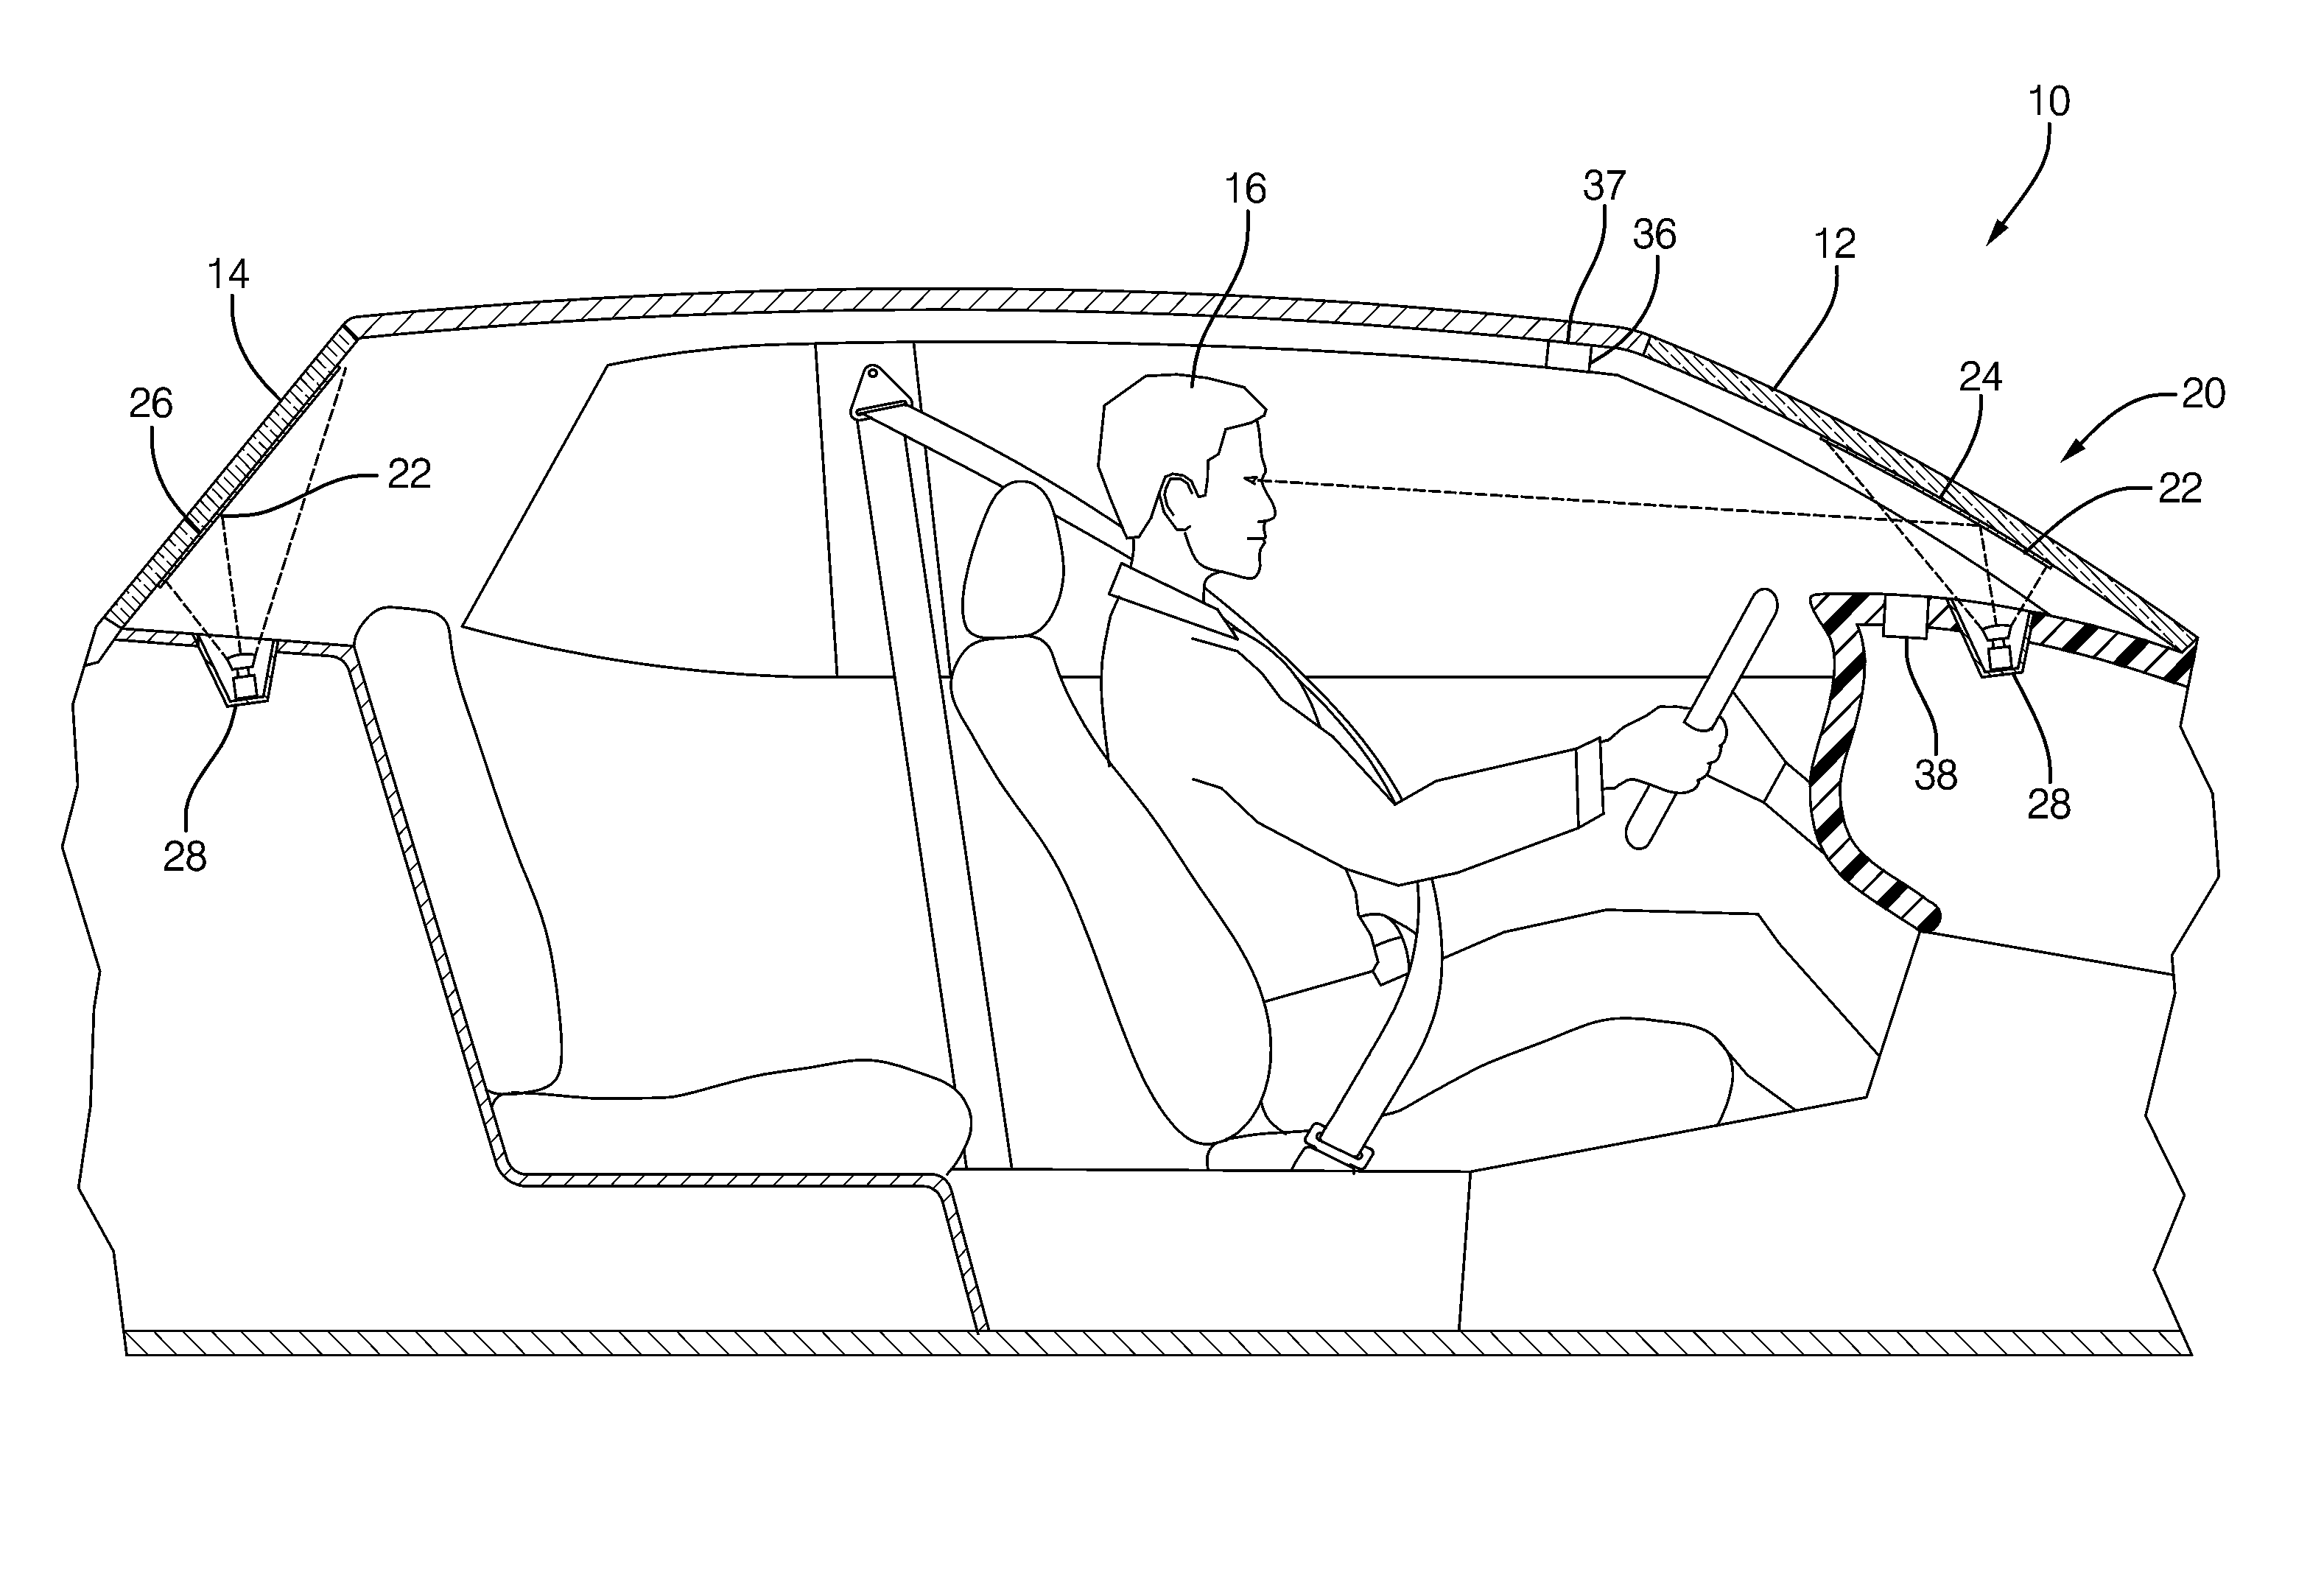 System and method of using fluorescent material to display information on a vehicle window